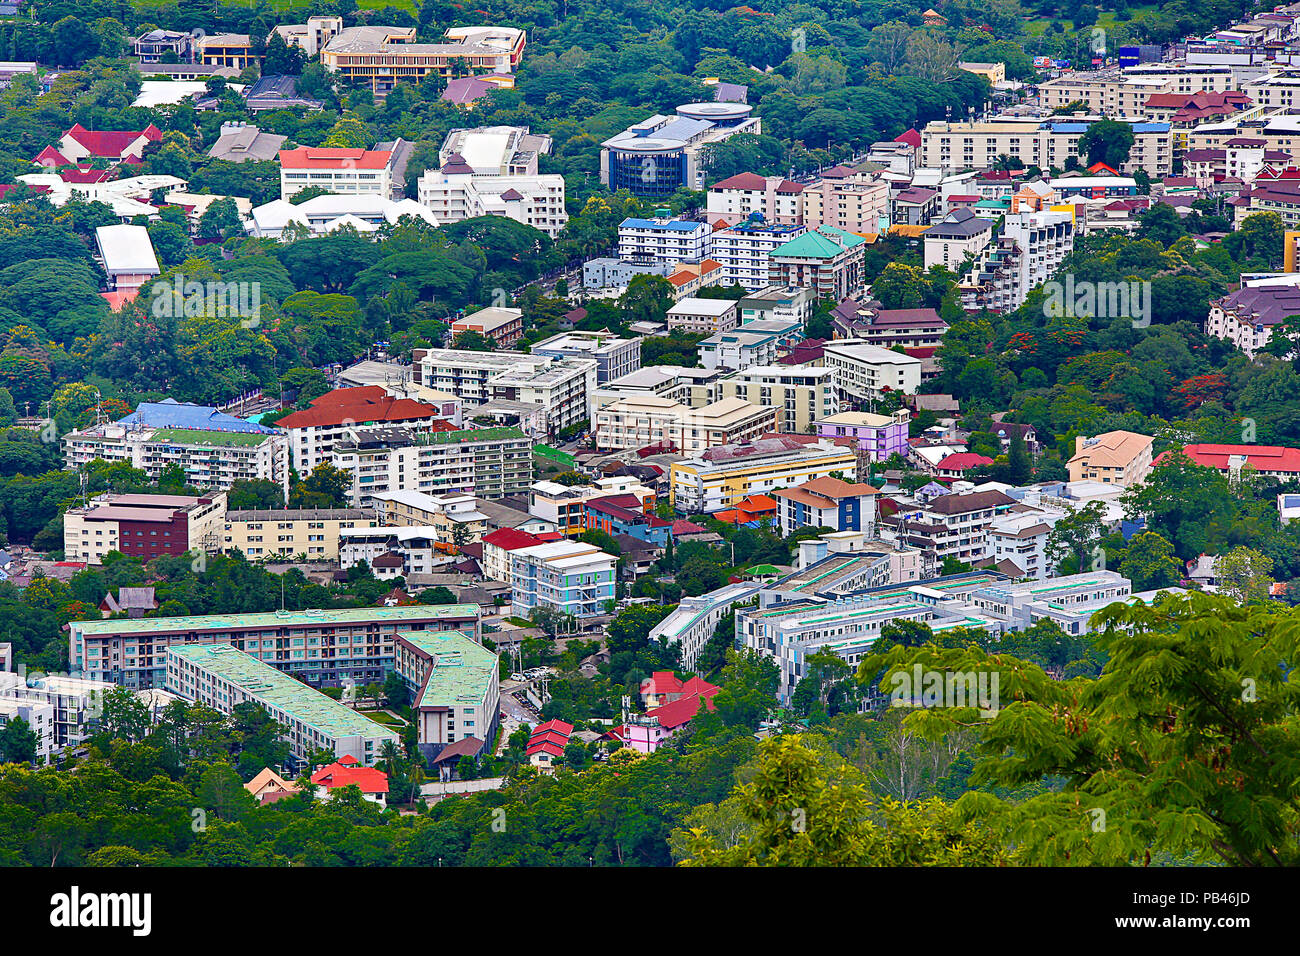 Aerial view over the colorful buildings in Chiang Mai, Thailand. Stock Photo